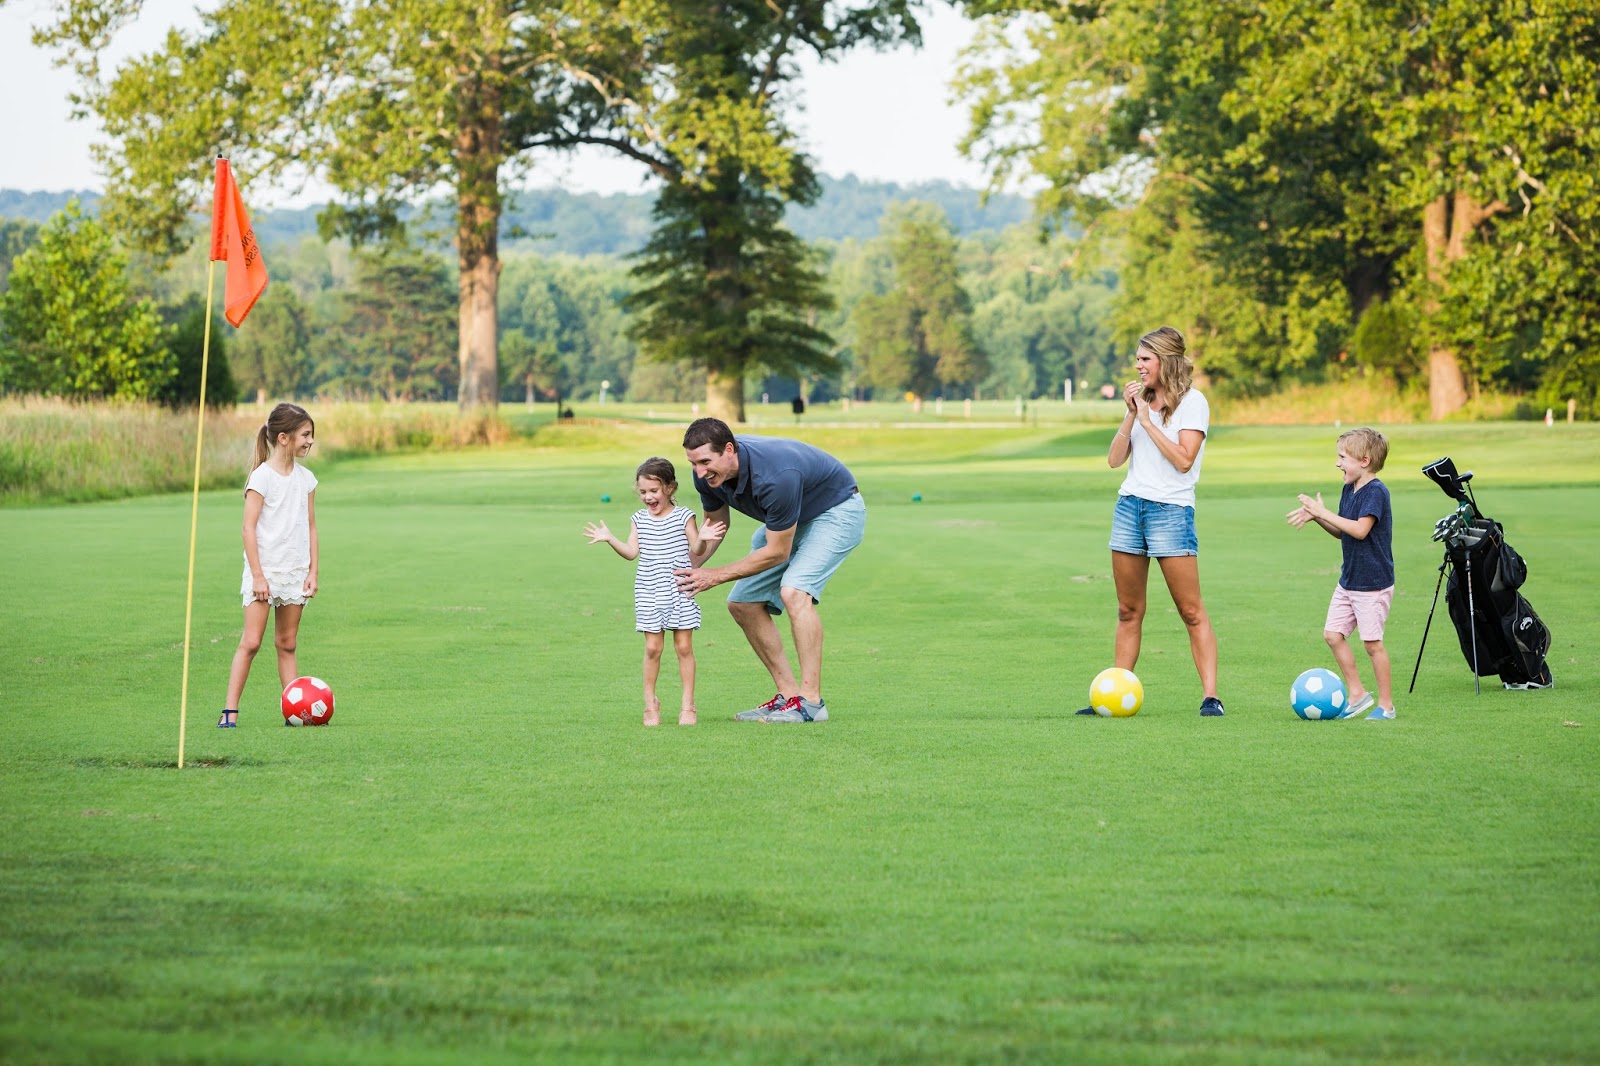 The Rules of FootGolf